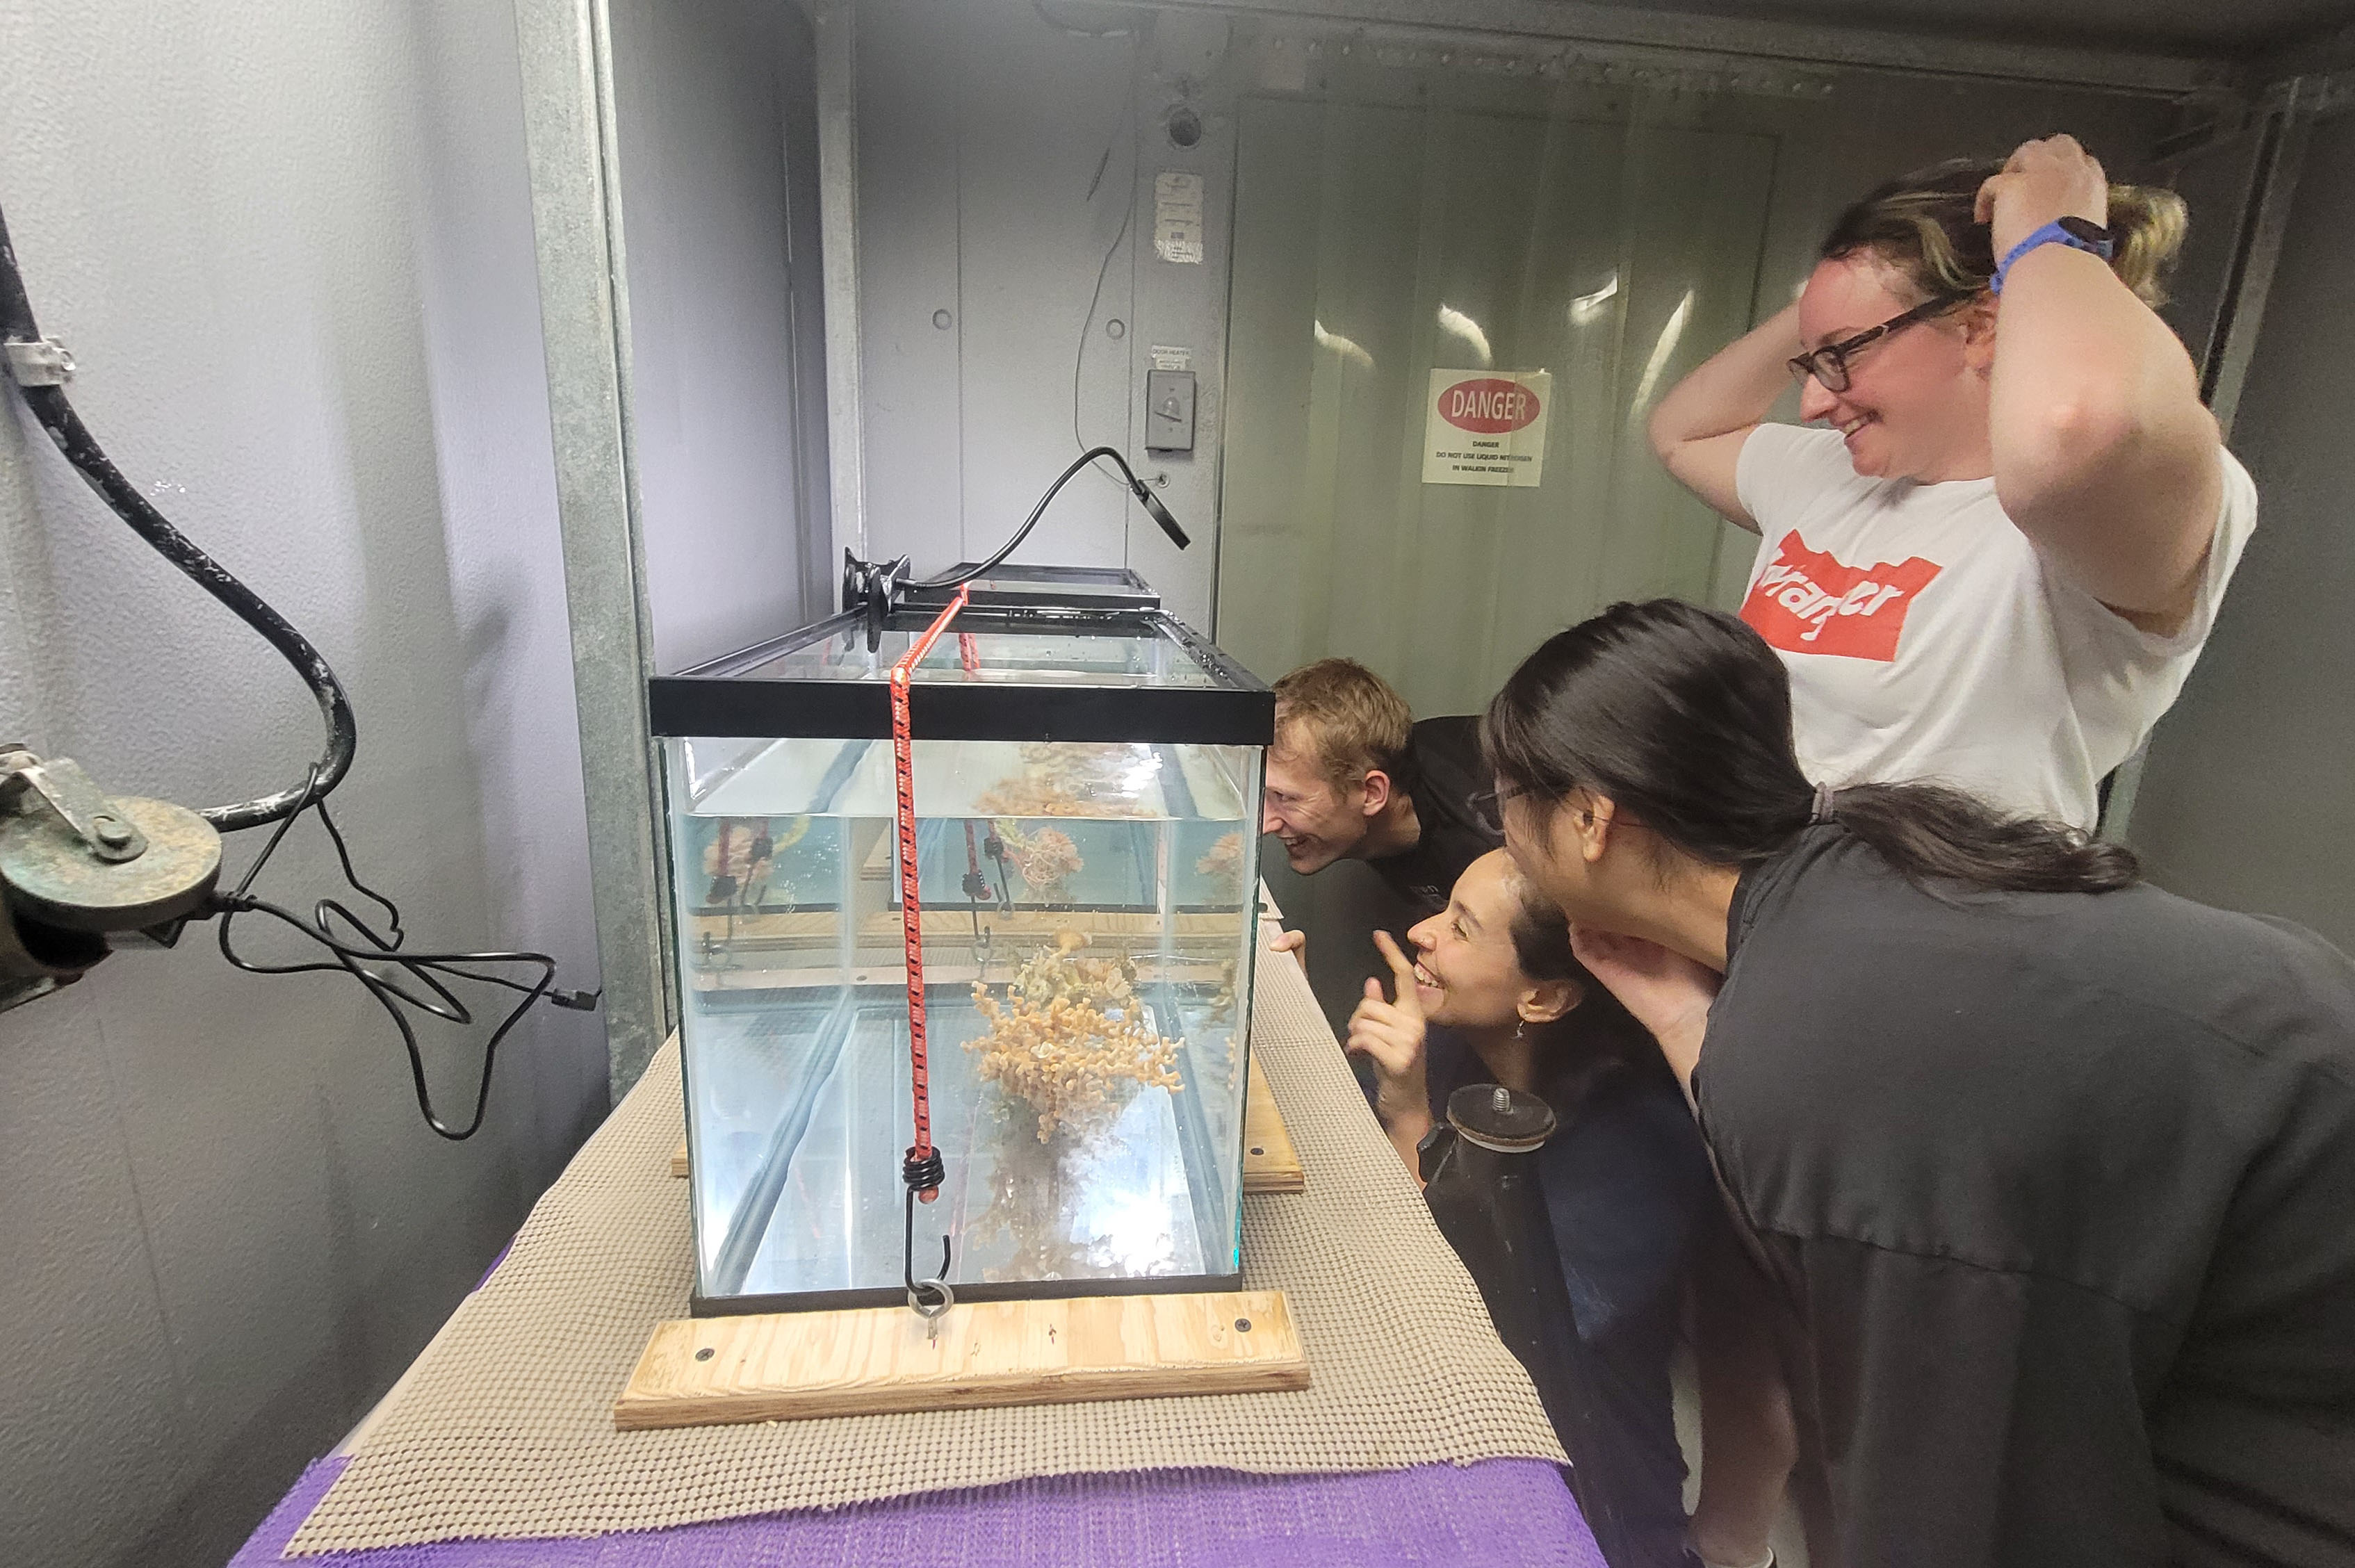 Bristol scientists observing collected samples in aquarium simulating cold seawater conditions